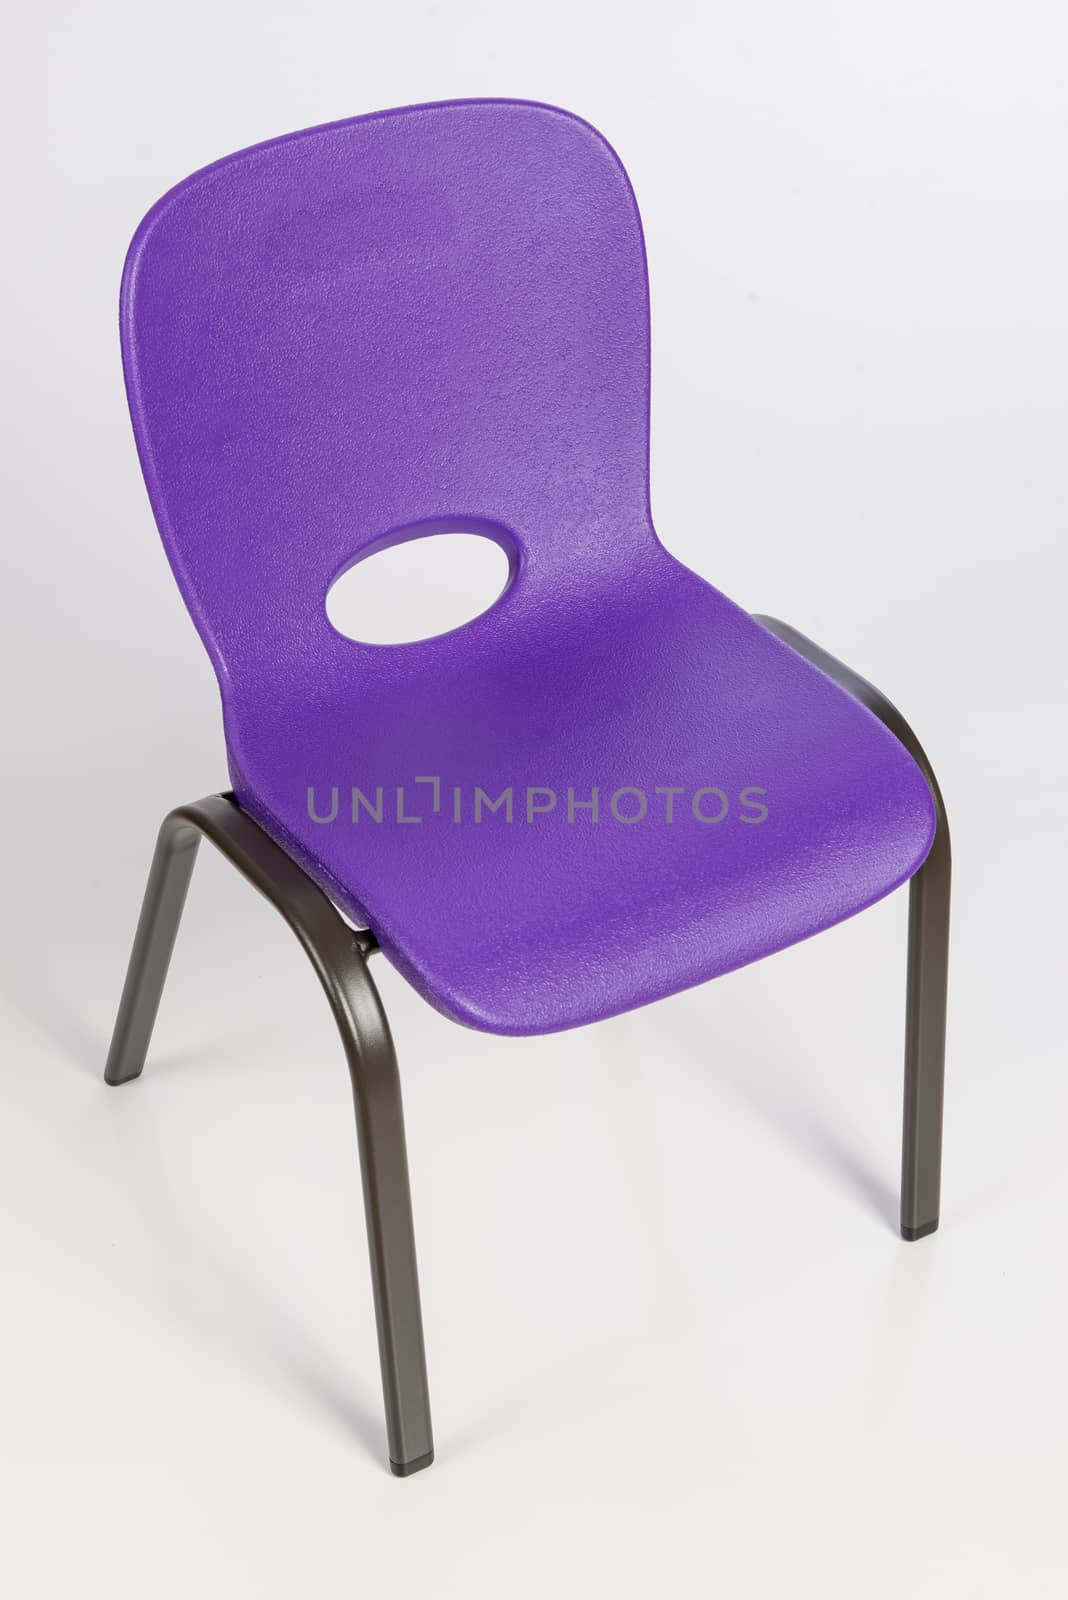 Young child chair isolated on white background.